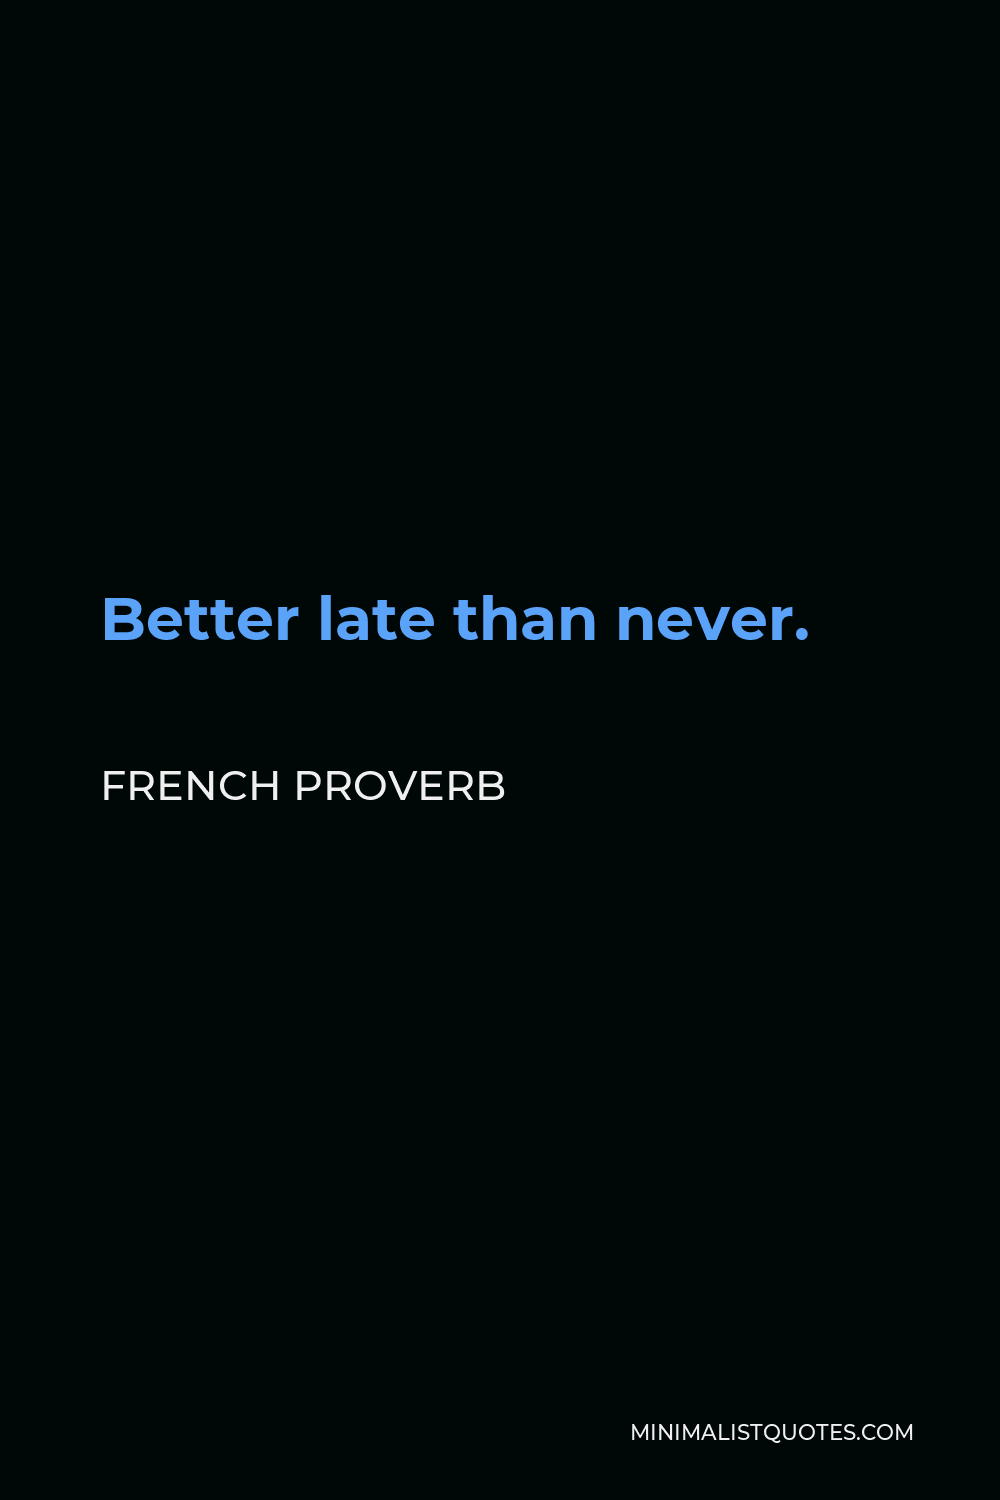 French Proverb Quote - Better late than never.